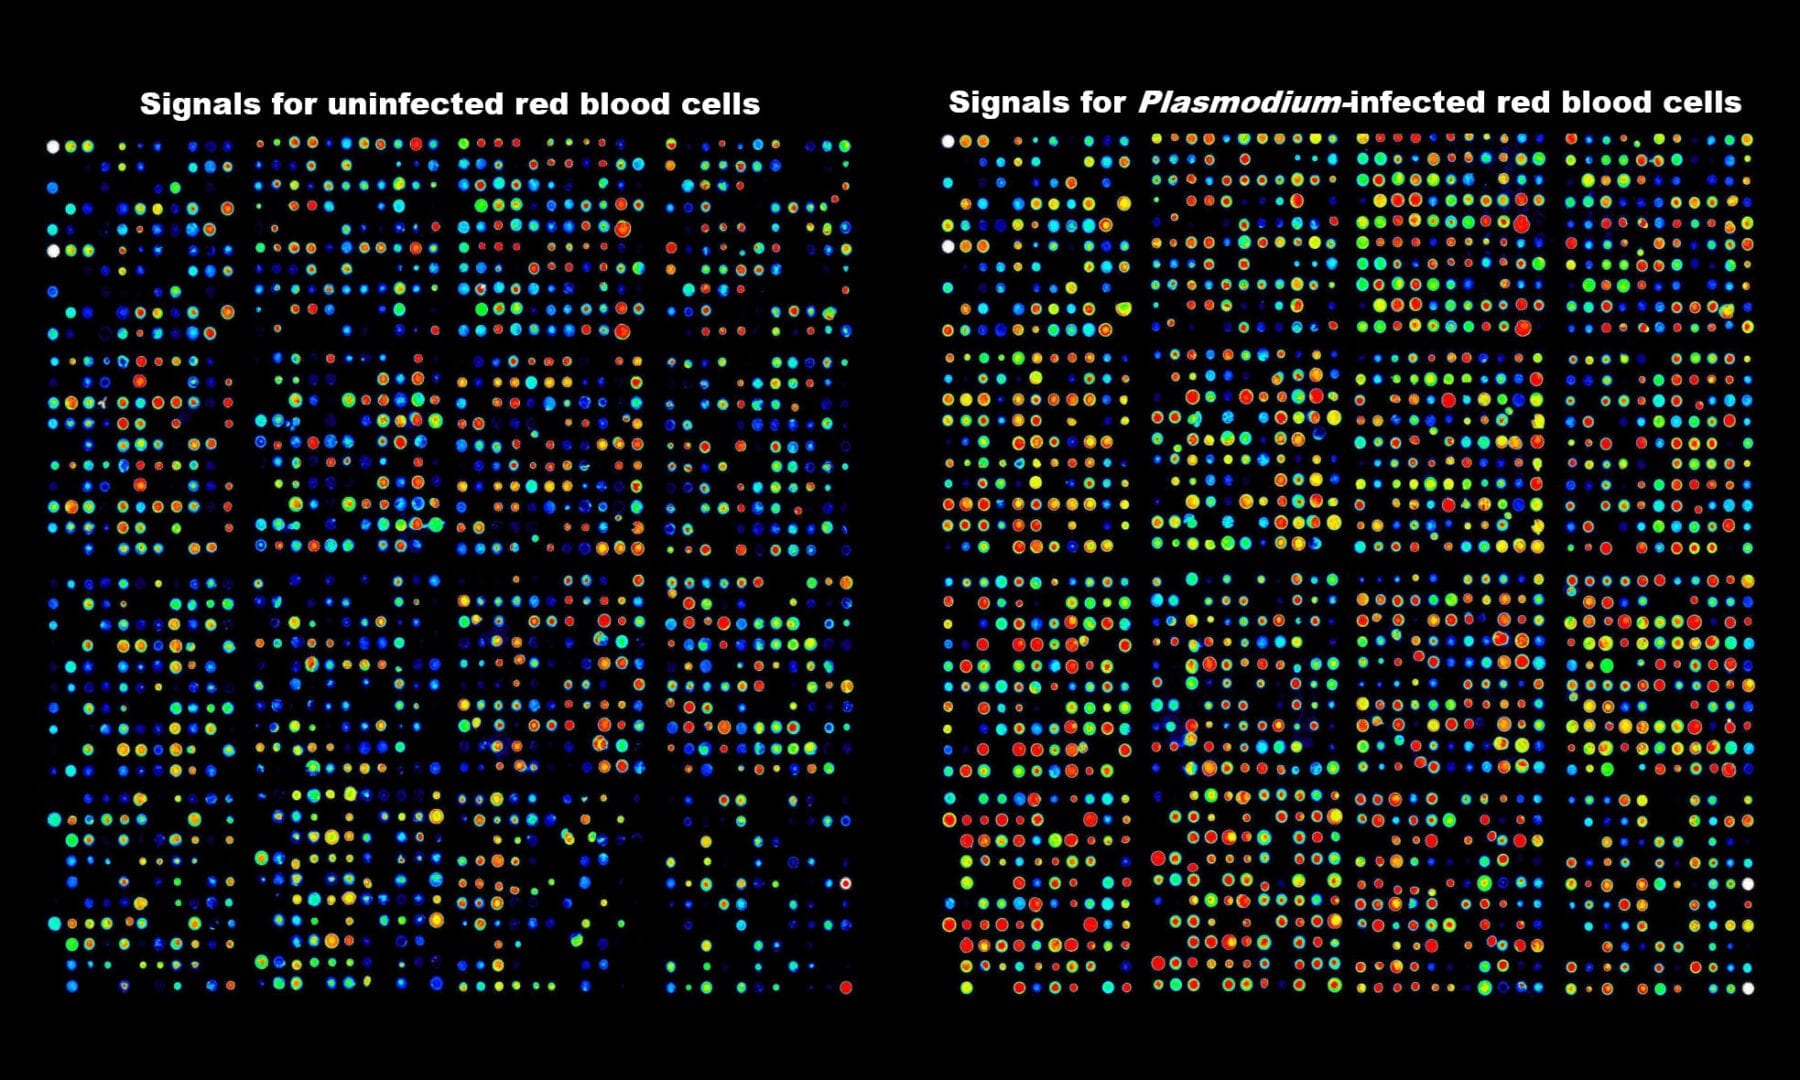 Antibody array data showing activation of kinases in human red blood cells infected with the malaria parasite.